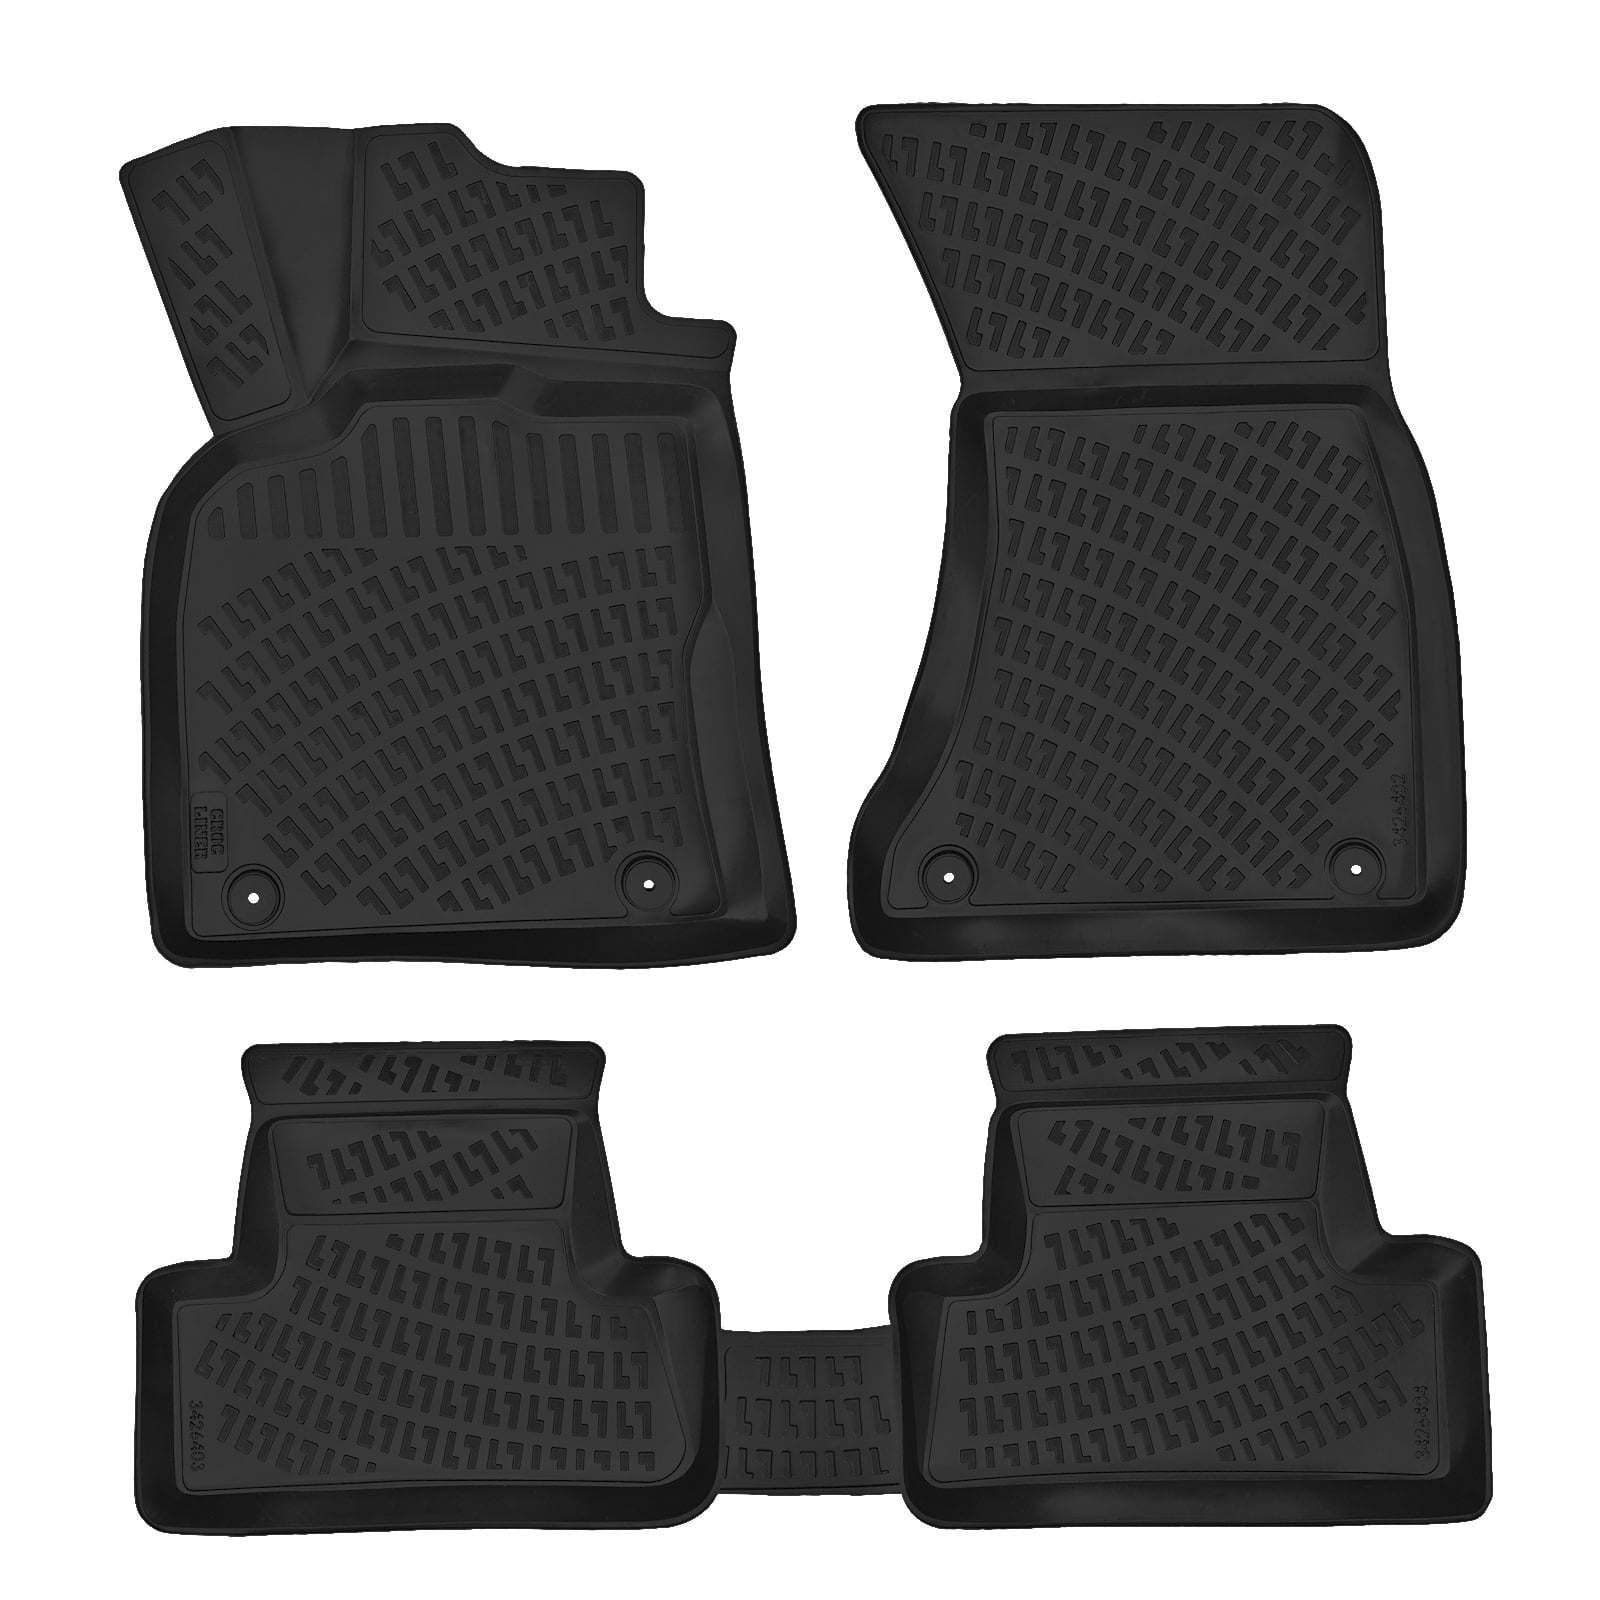 Crocliner All Weather Rubber Floor Mats for AUDI Q5 20092017